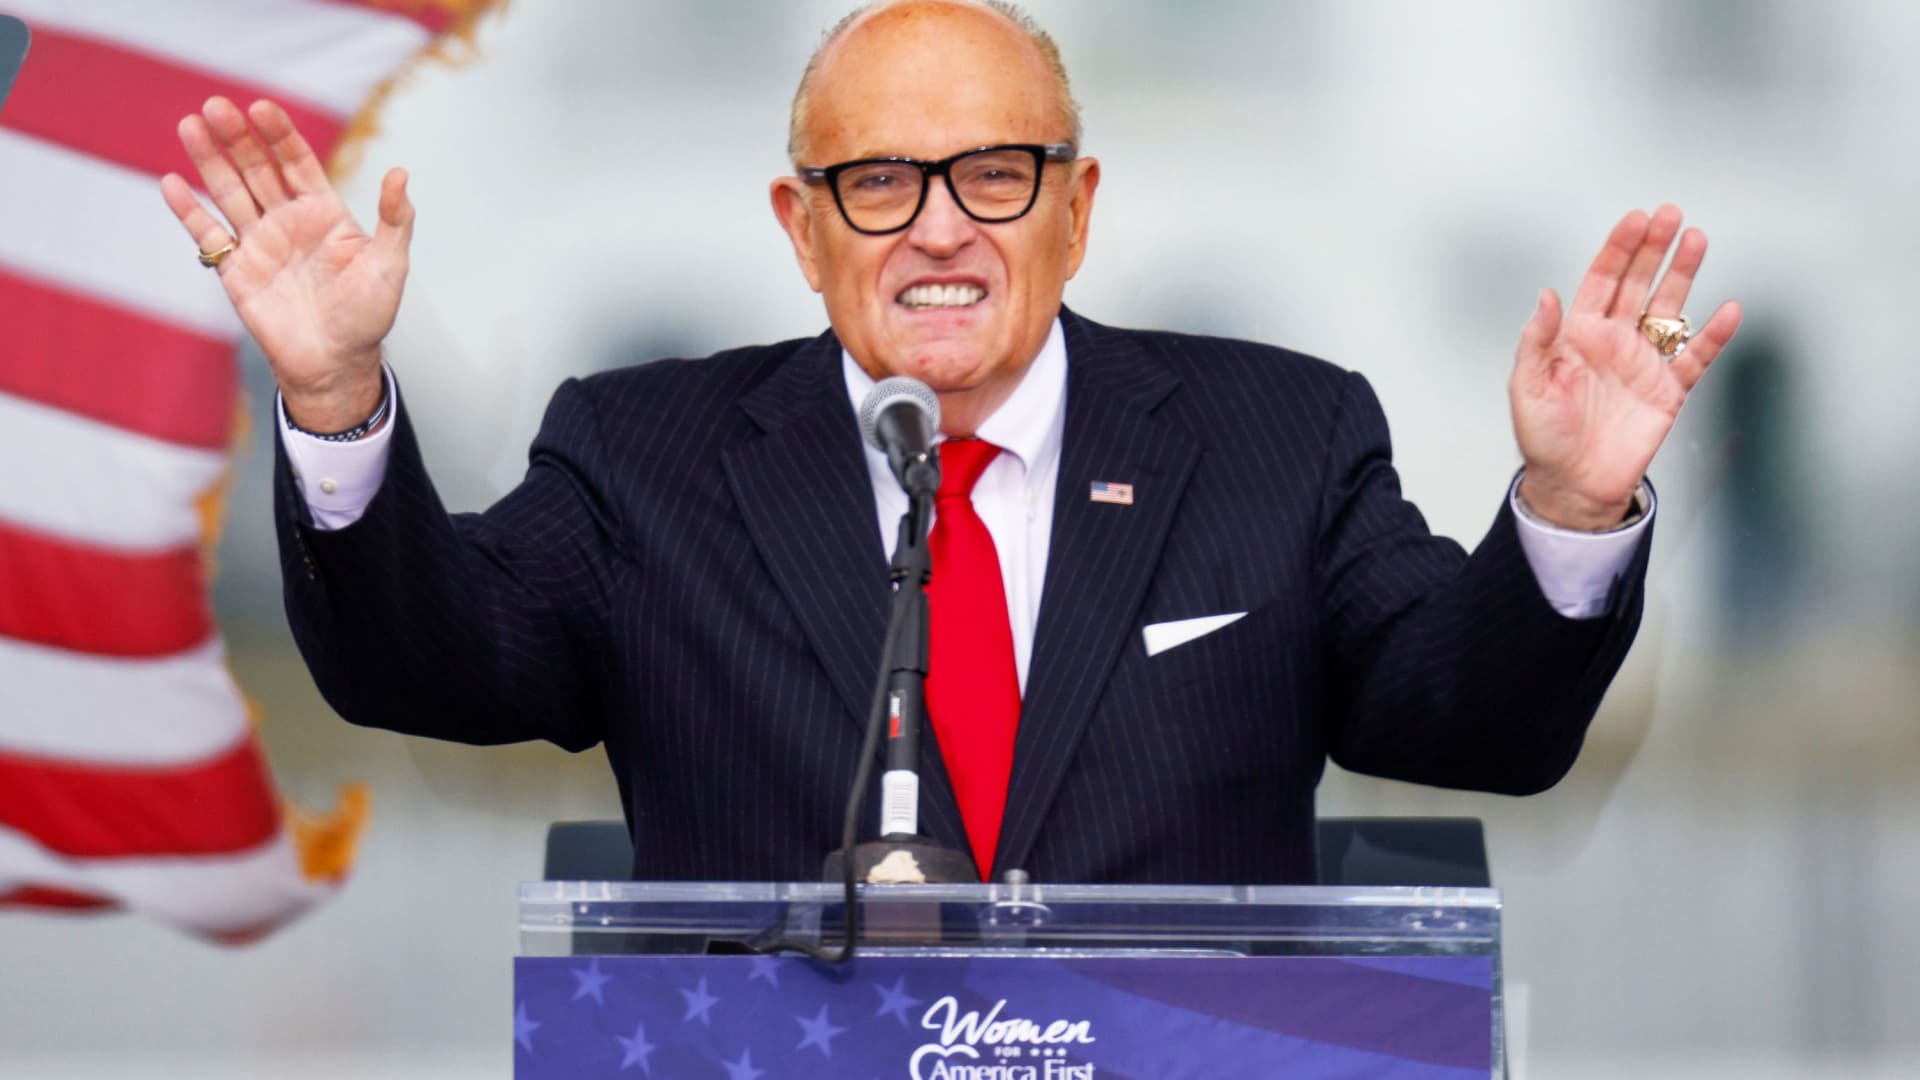 U.S. President Donald Trump's personal lawyer Rudy Giuliani speaks as Trump supporters gather by the White House ahead of his speech to contest the certification by the U.S. Congress of the results of the 2020 U.S. presidential election in Washington, January 6, 2021.